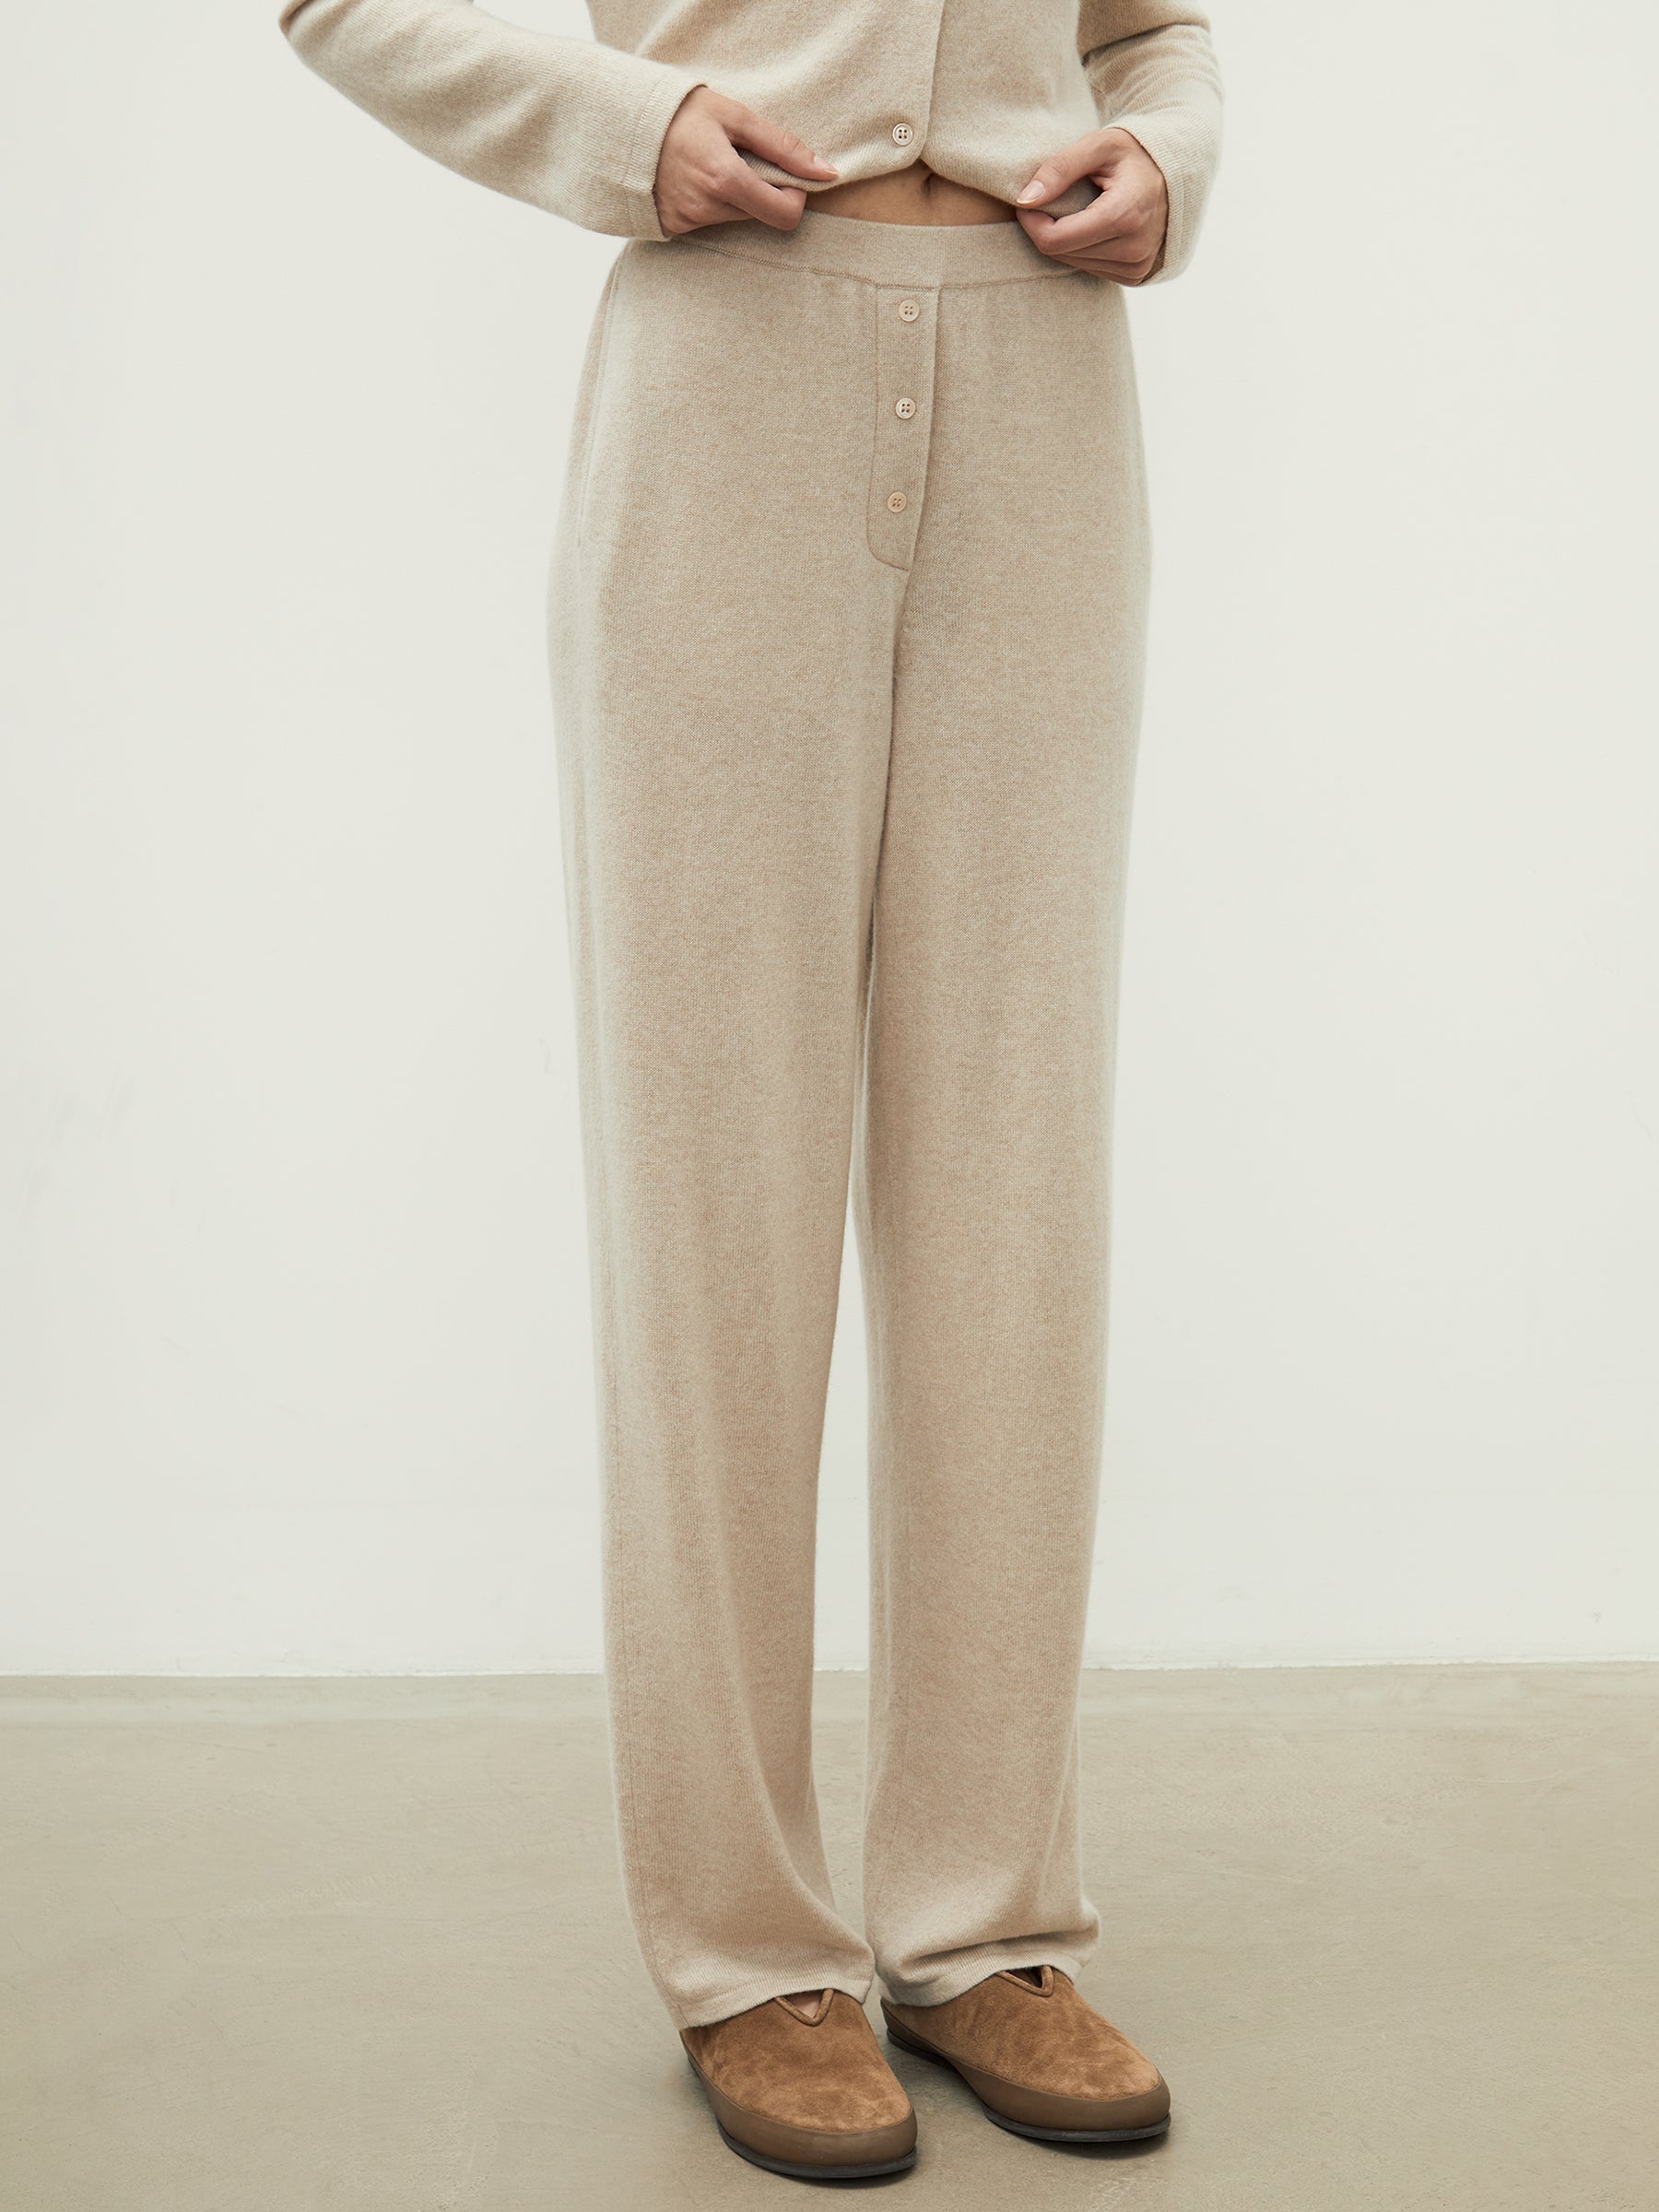 Cashmere button fly trousers